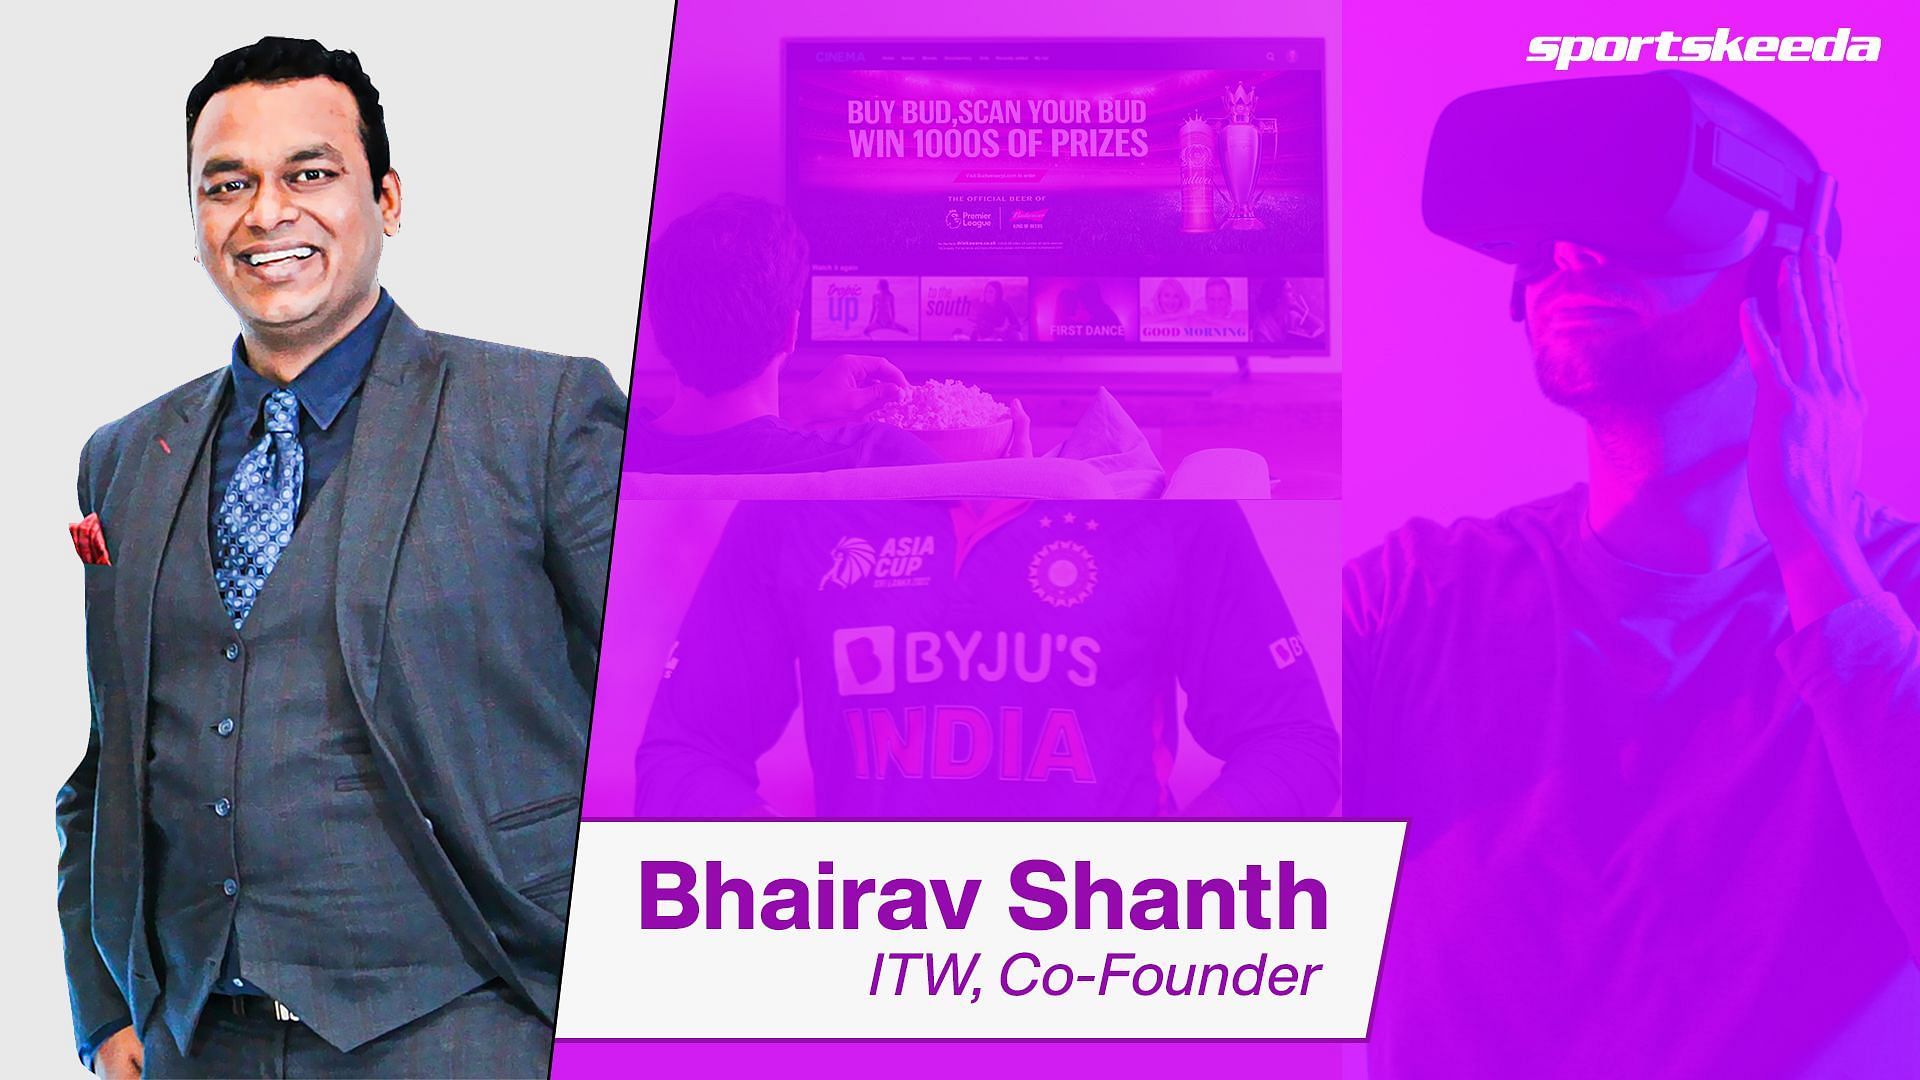 Bhairav Shanth, Co Founder ITW Universe Thumbnail